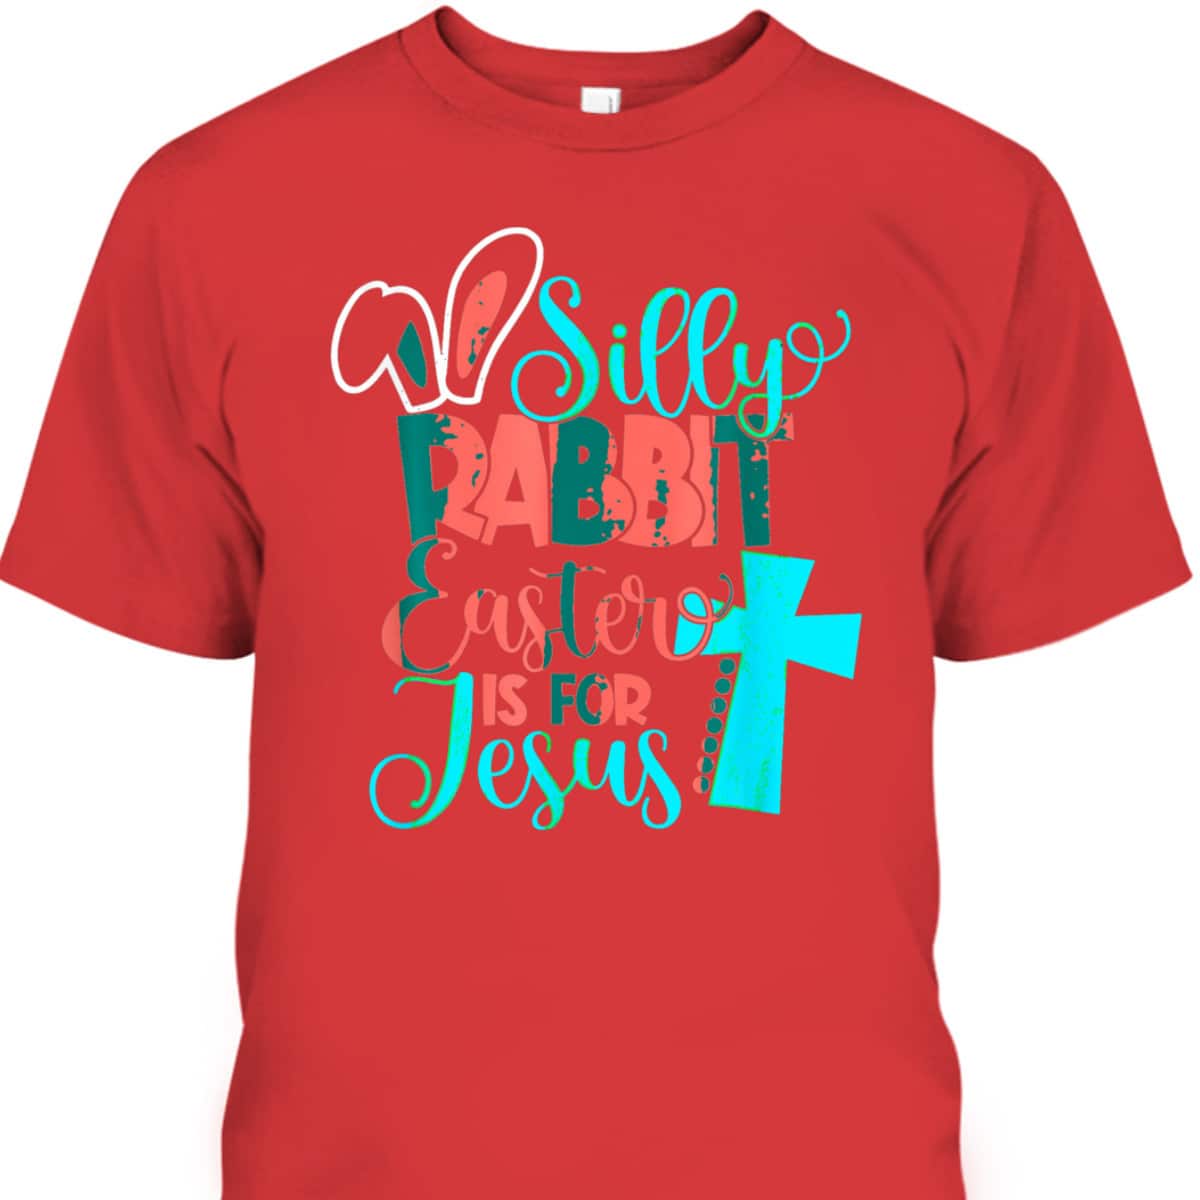 Silly Rabbit Easter Is For Jesus Christian Cross Easter Day T-Shirt